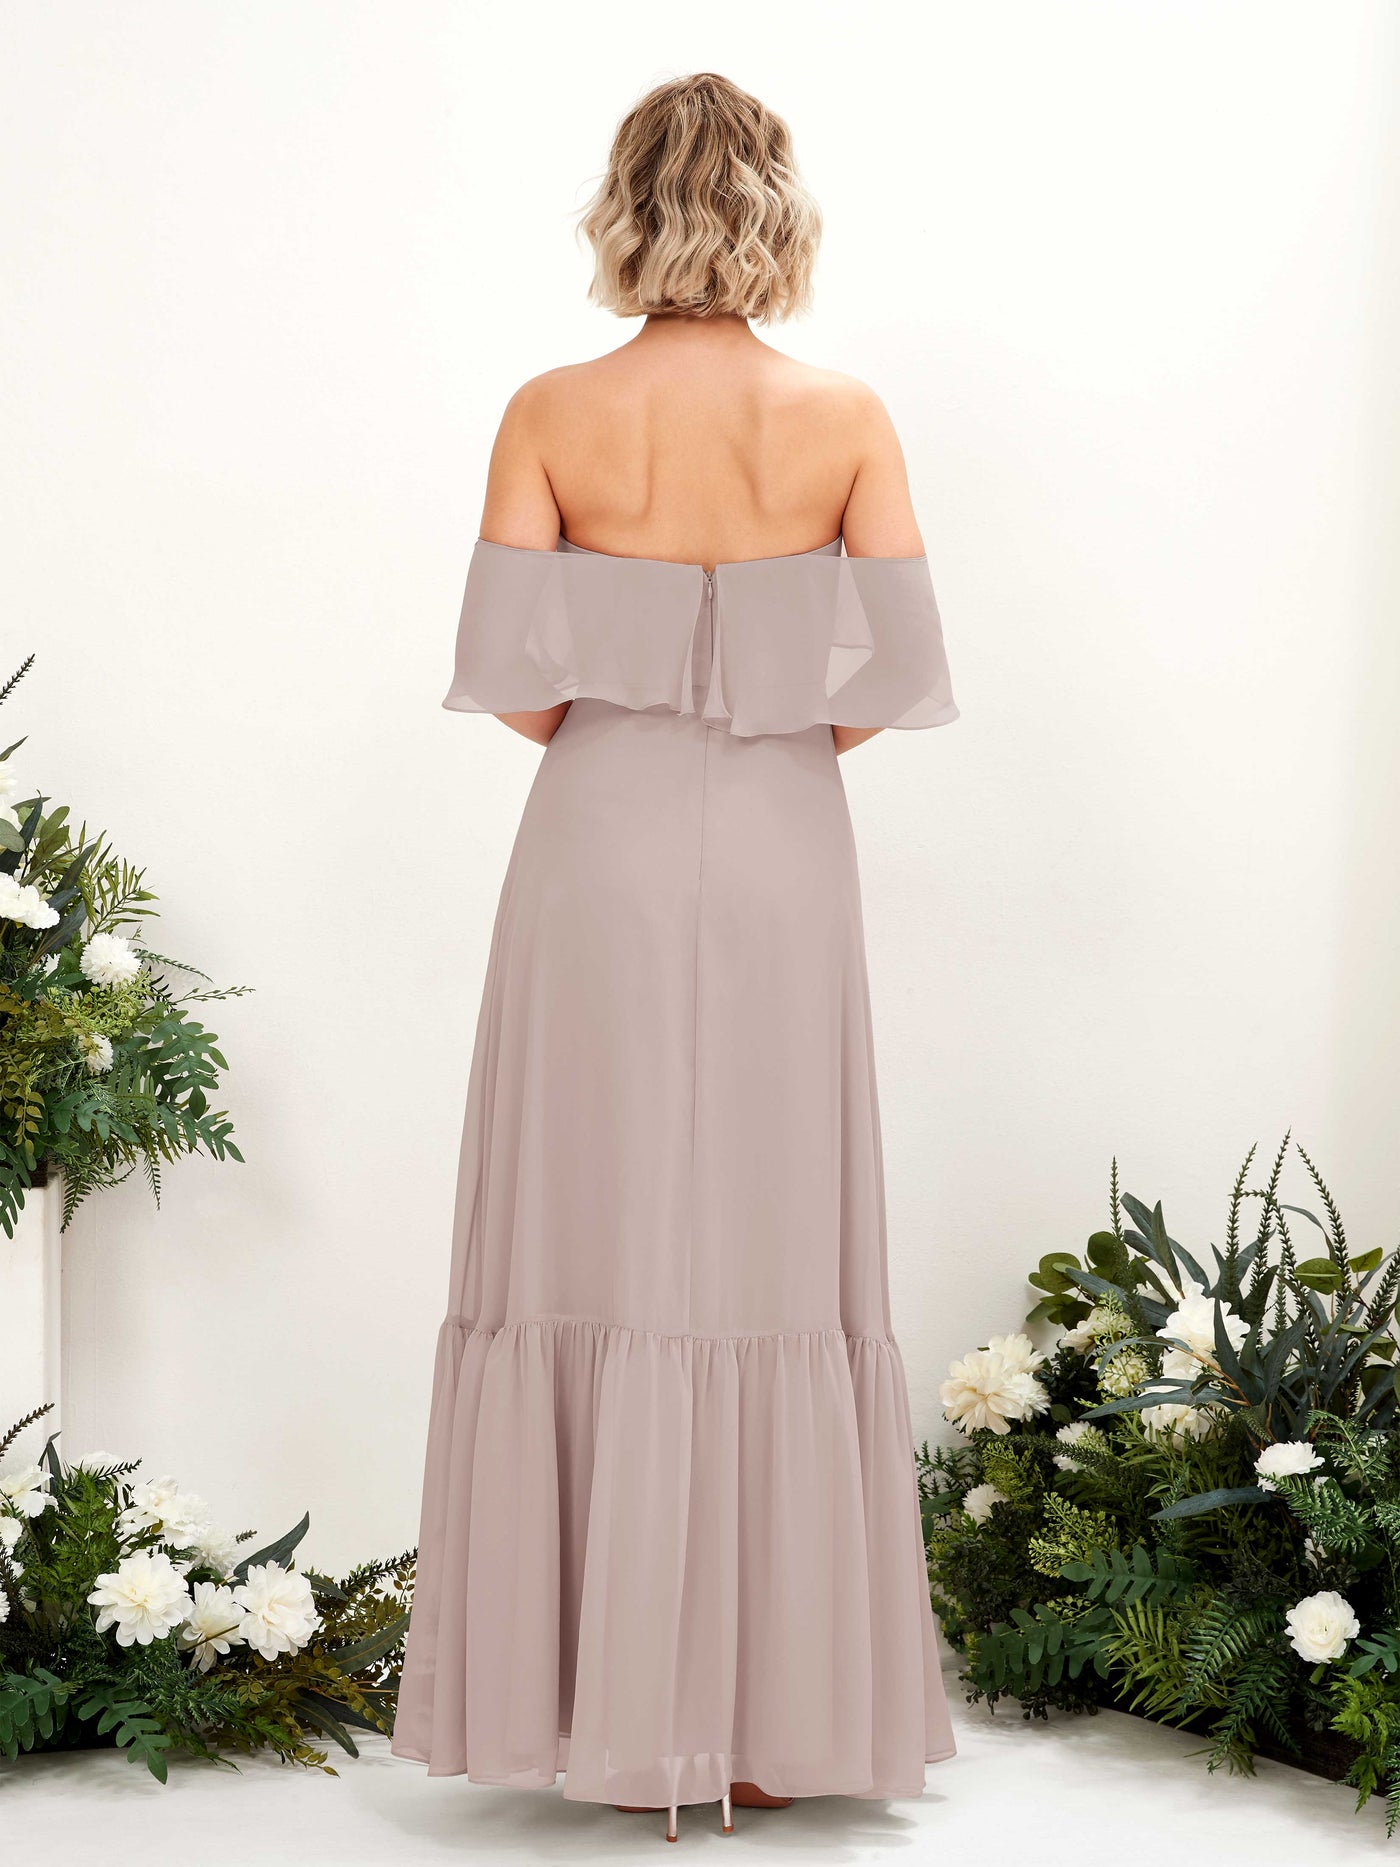 Taupe Bridesmaid Dresses Bridesmaid Dress A-line Chiffon Off Shoulder Full Length Sleeveless Wedding Party Dress (81224524)#color_taupe